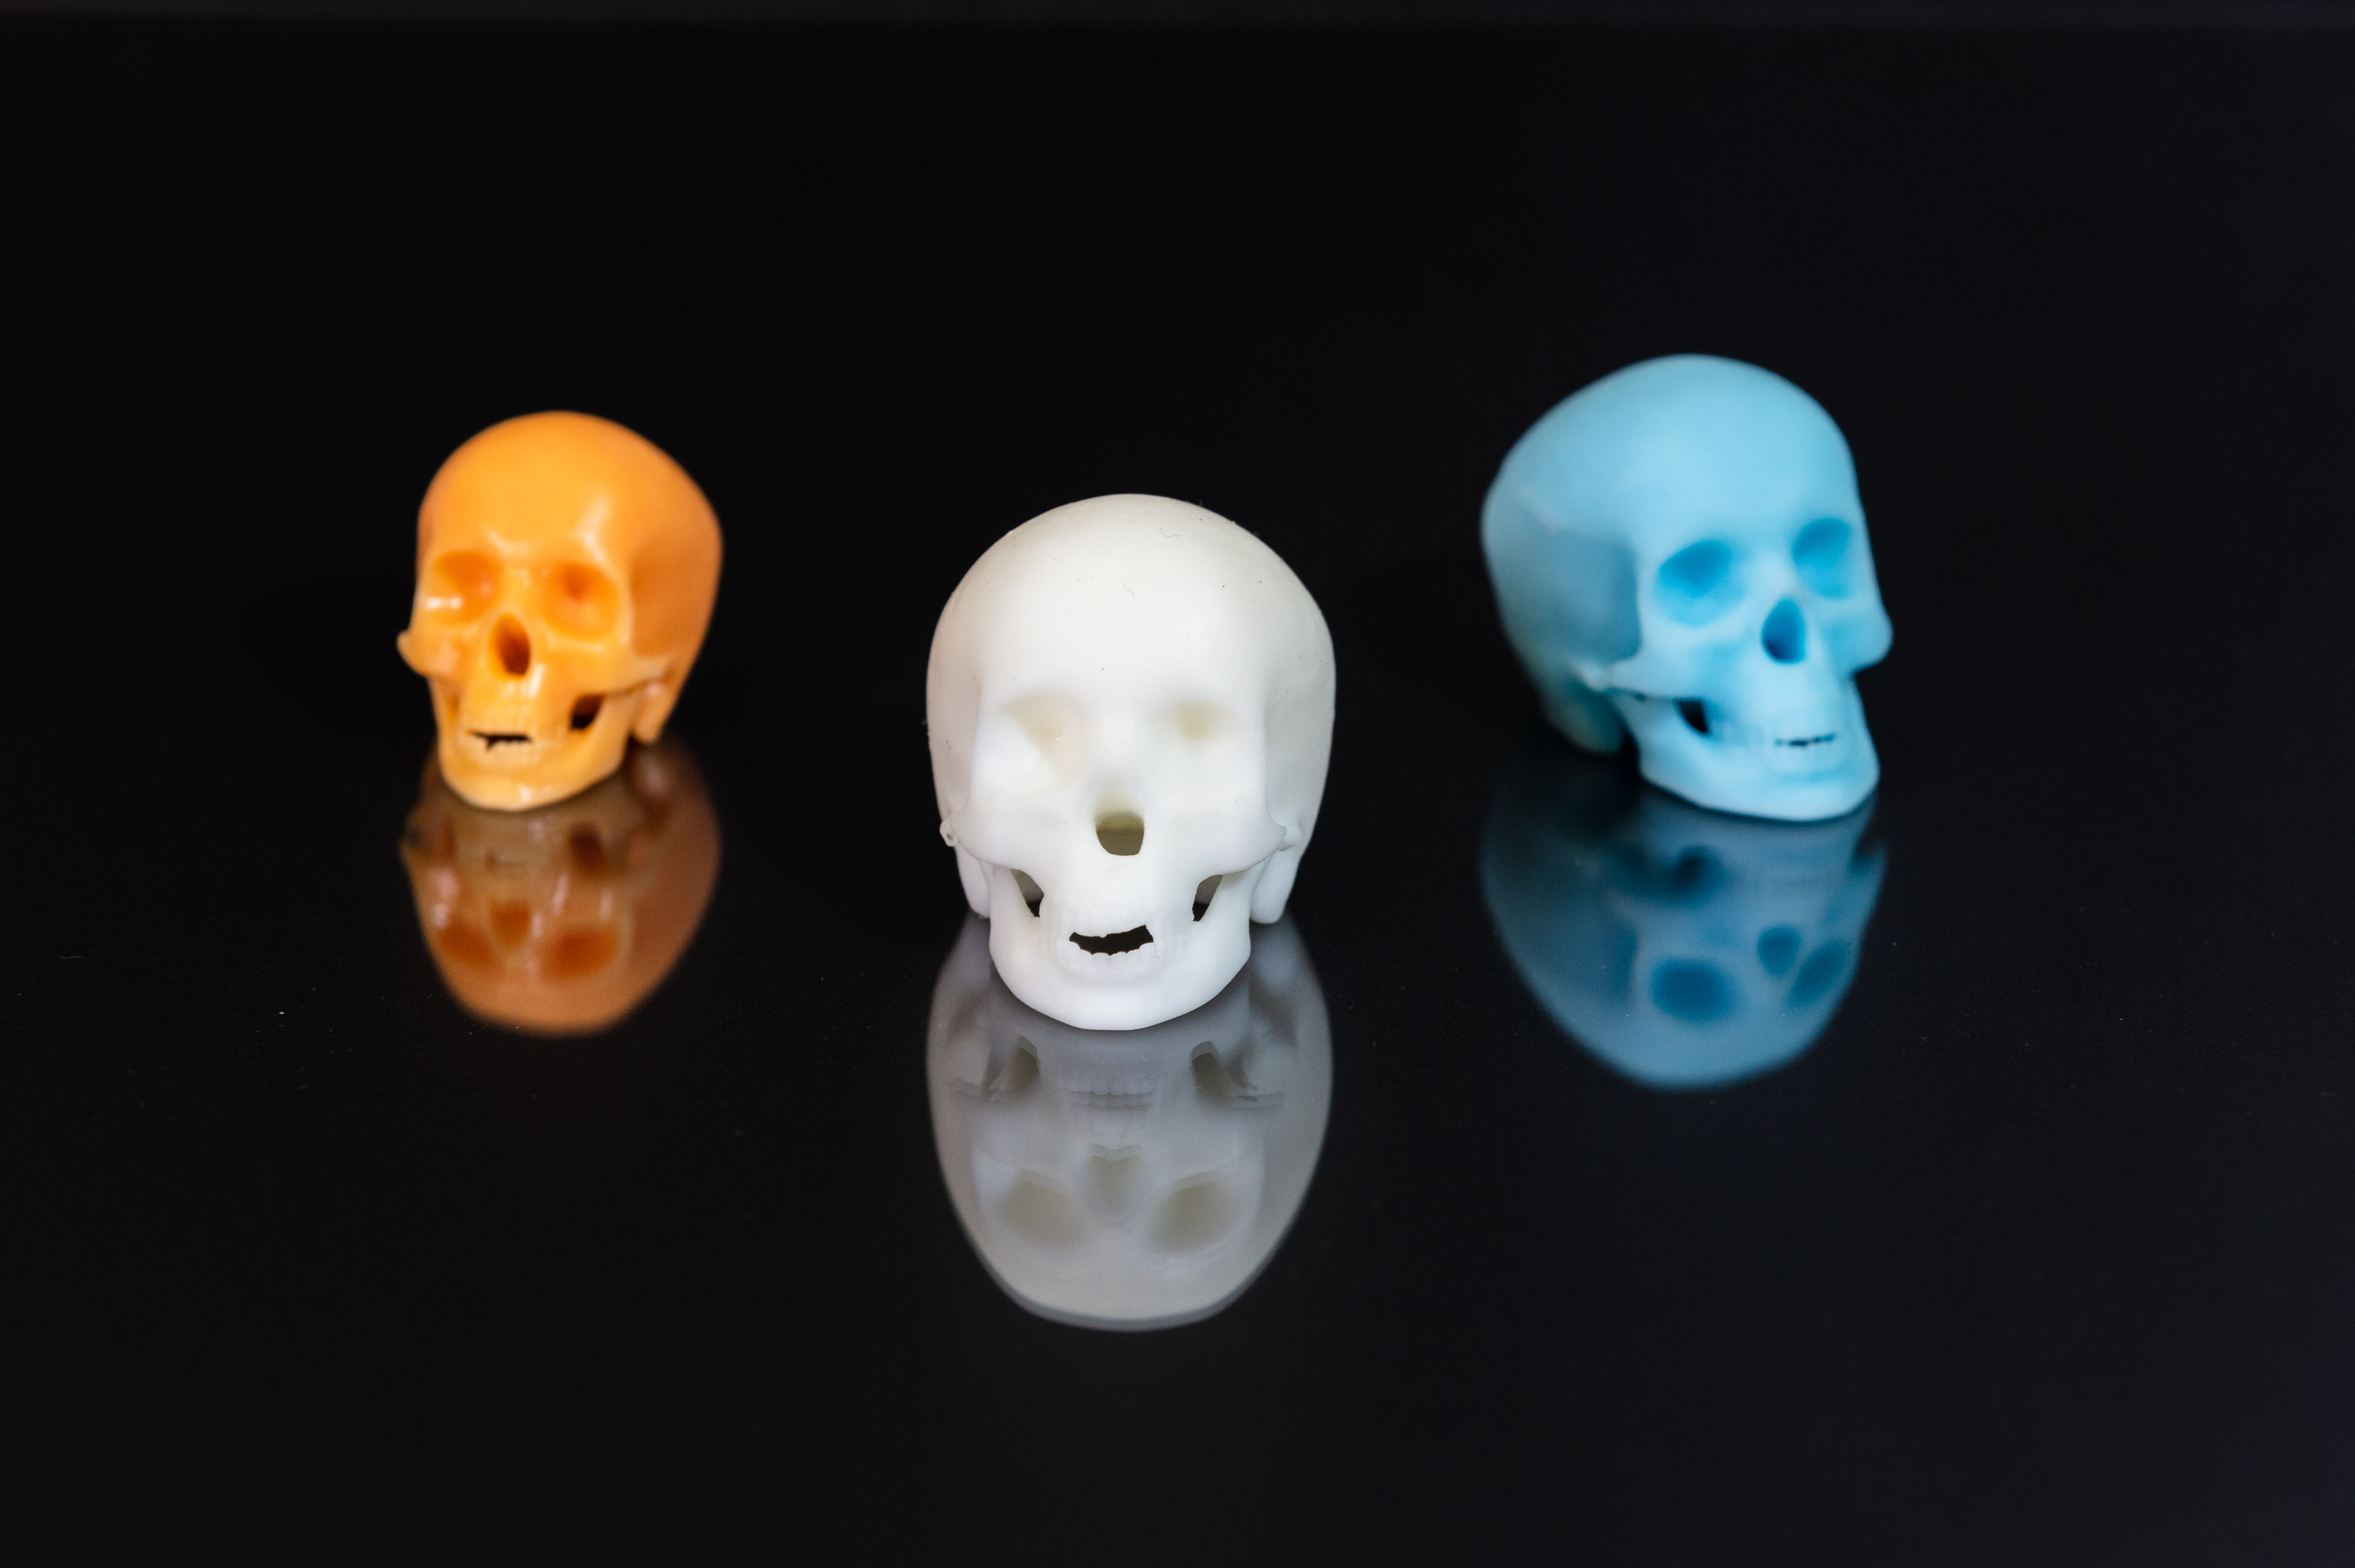 Medical models 3D printed with Spectroplast's silicone. Photo via Spectroplast.